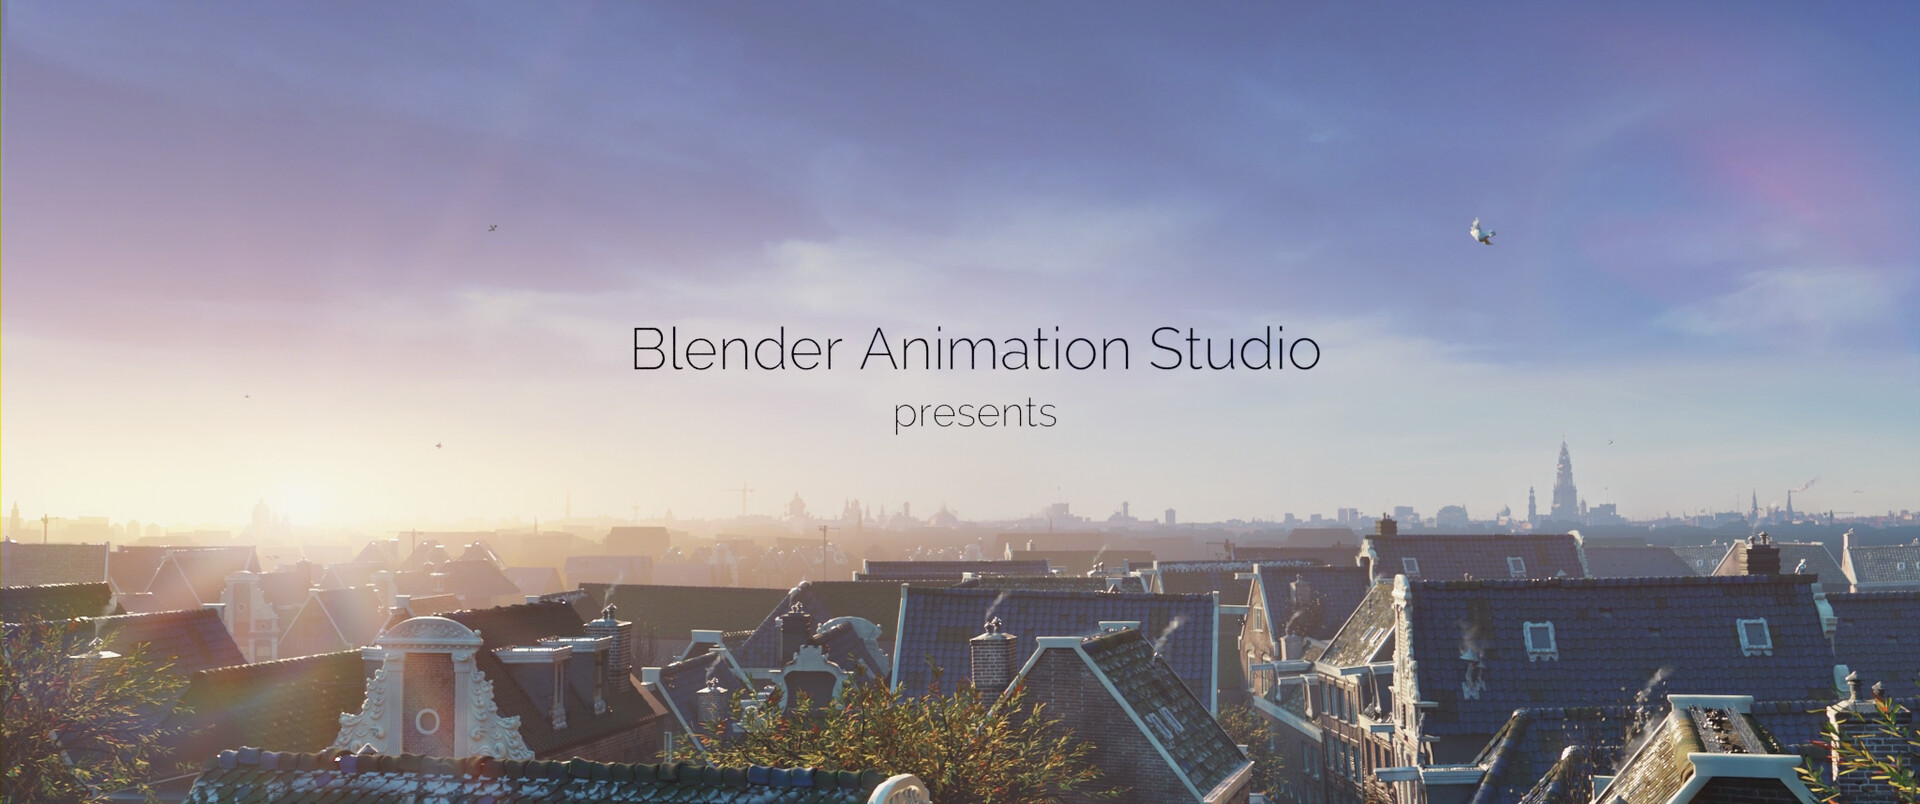 The film starts with the opening shot showing the Amsterdam skyline.
This volumetric light was quite fun to make.

However, it presented quite a challenge for when the camera pans down...